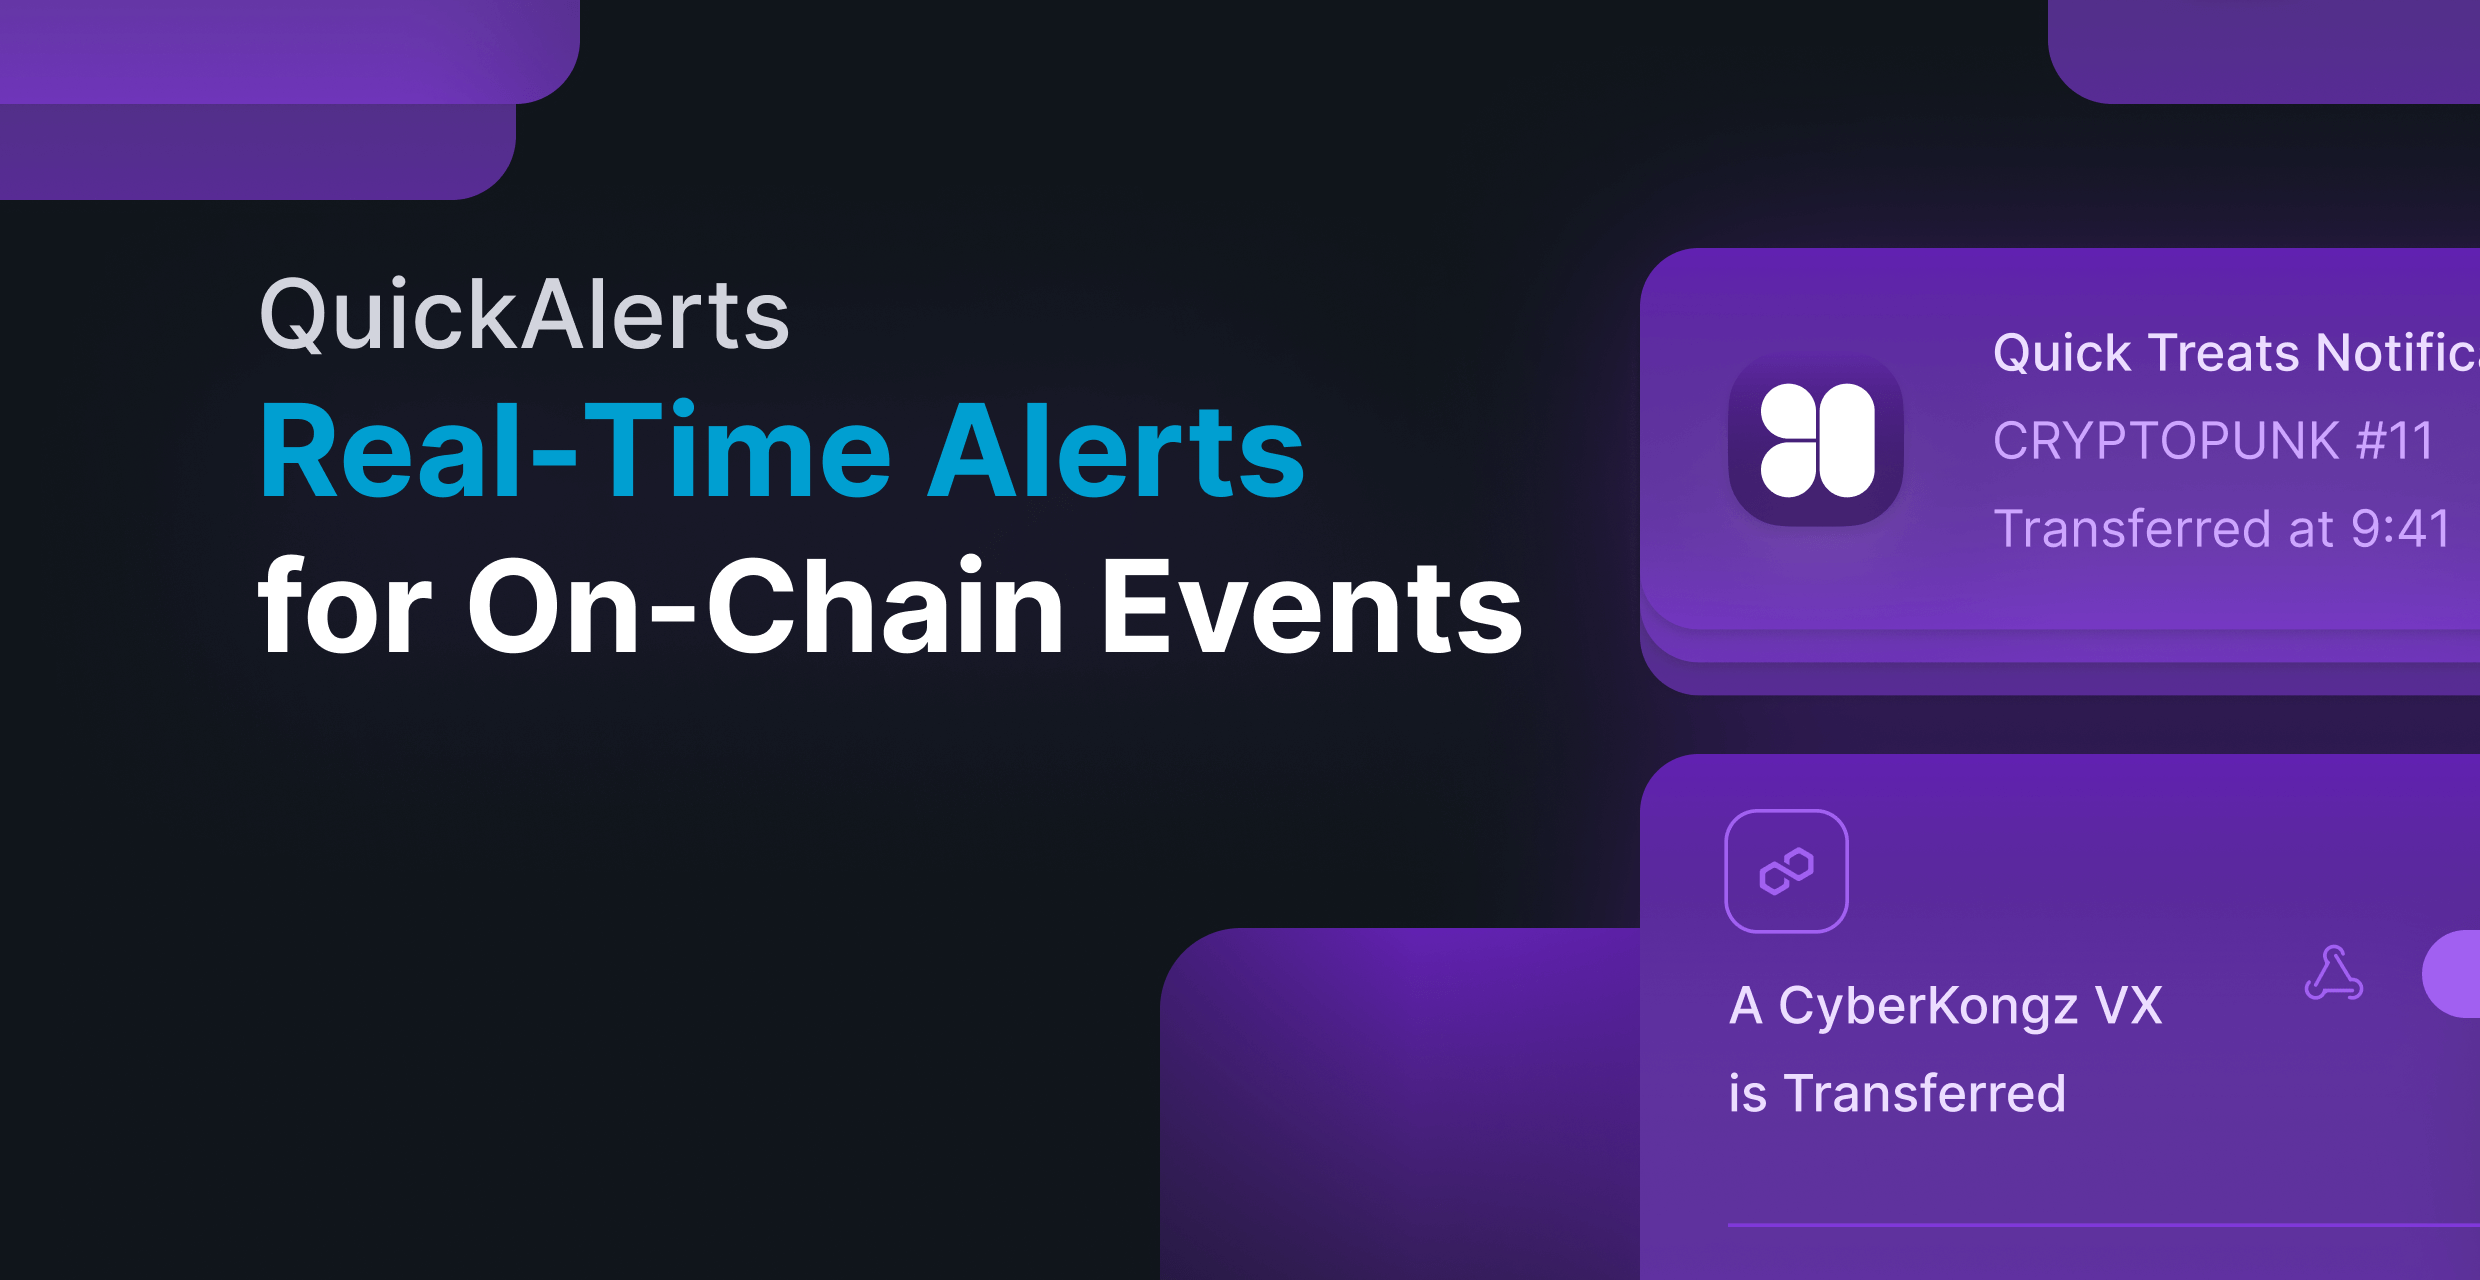 QuickAlerts: Real-Time Alerts for On-Chain Events